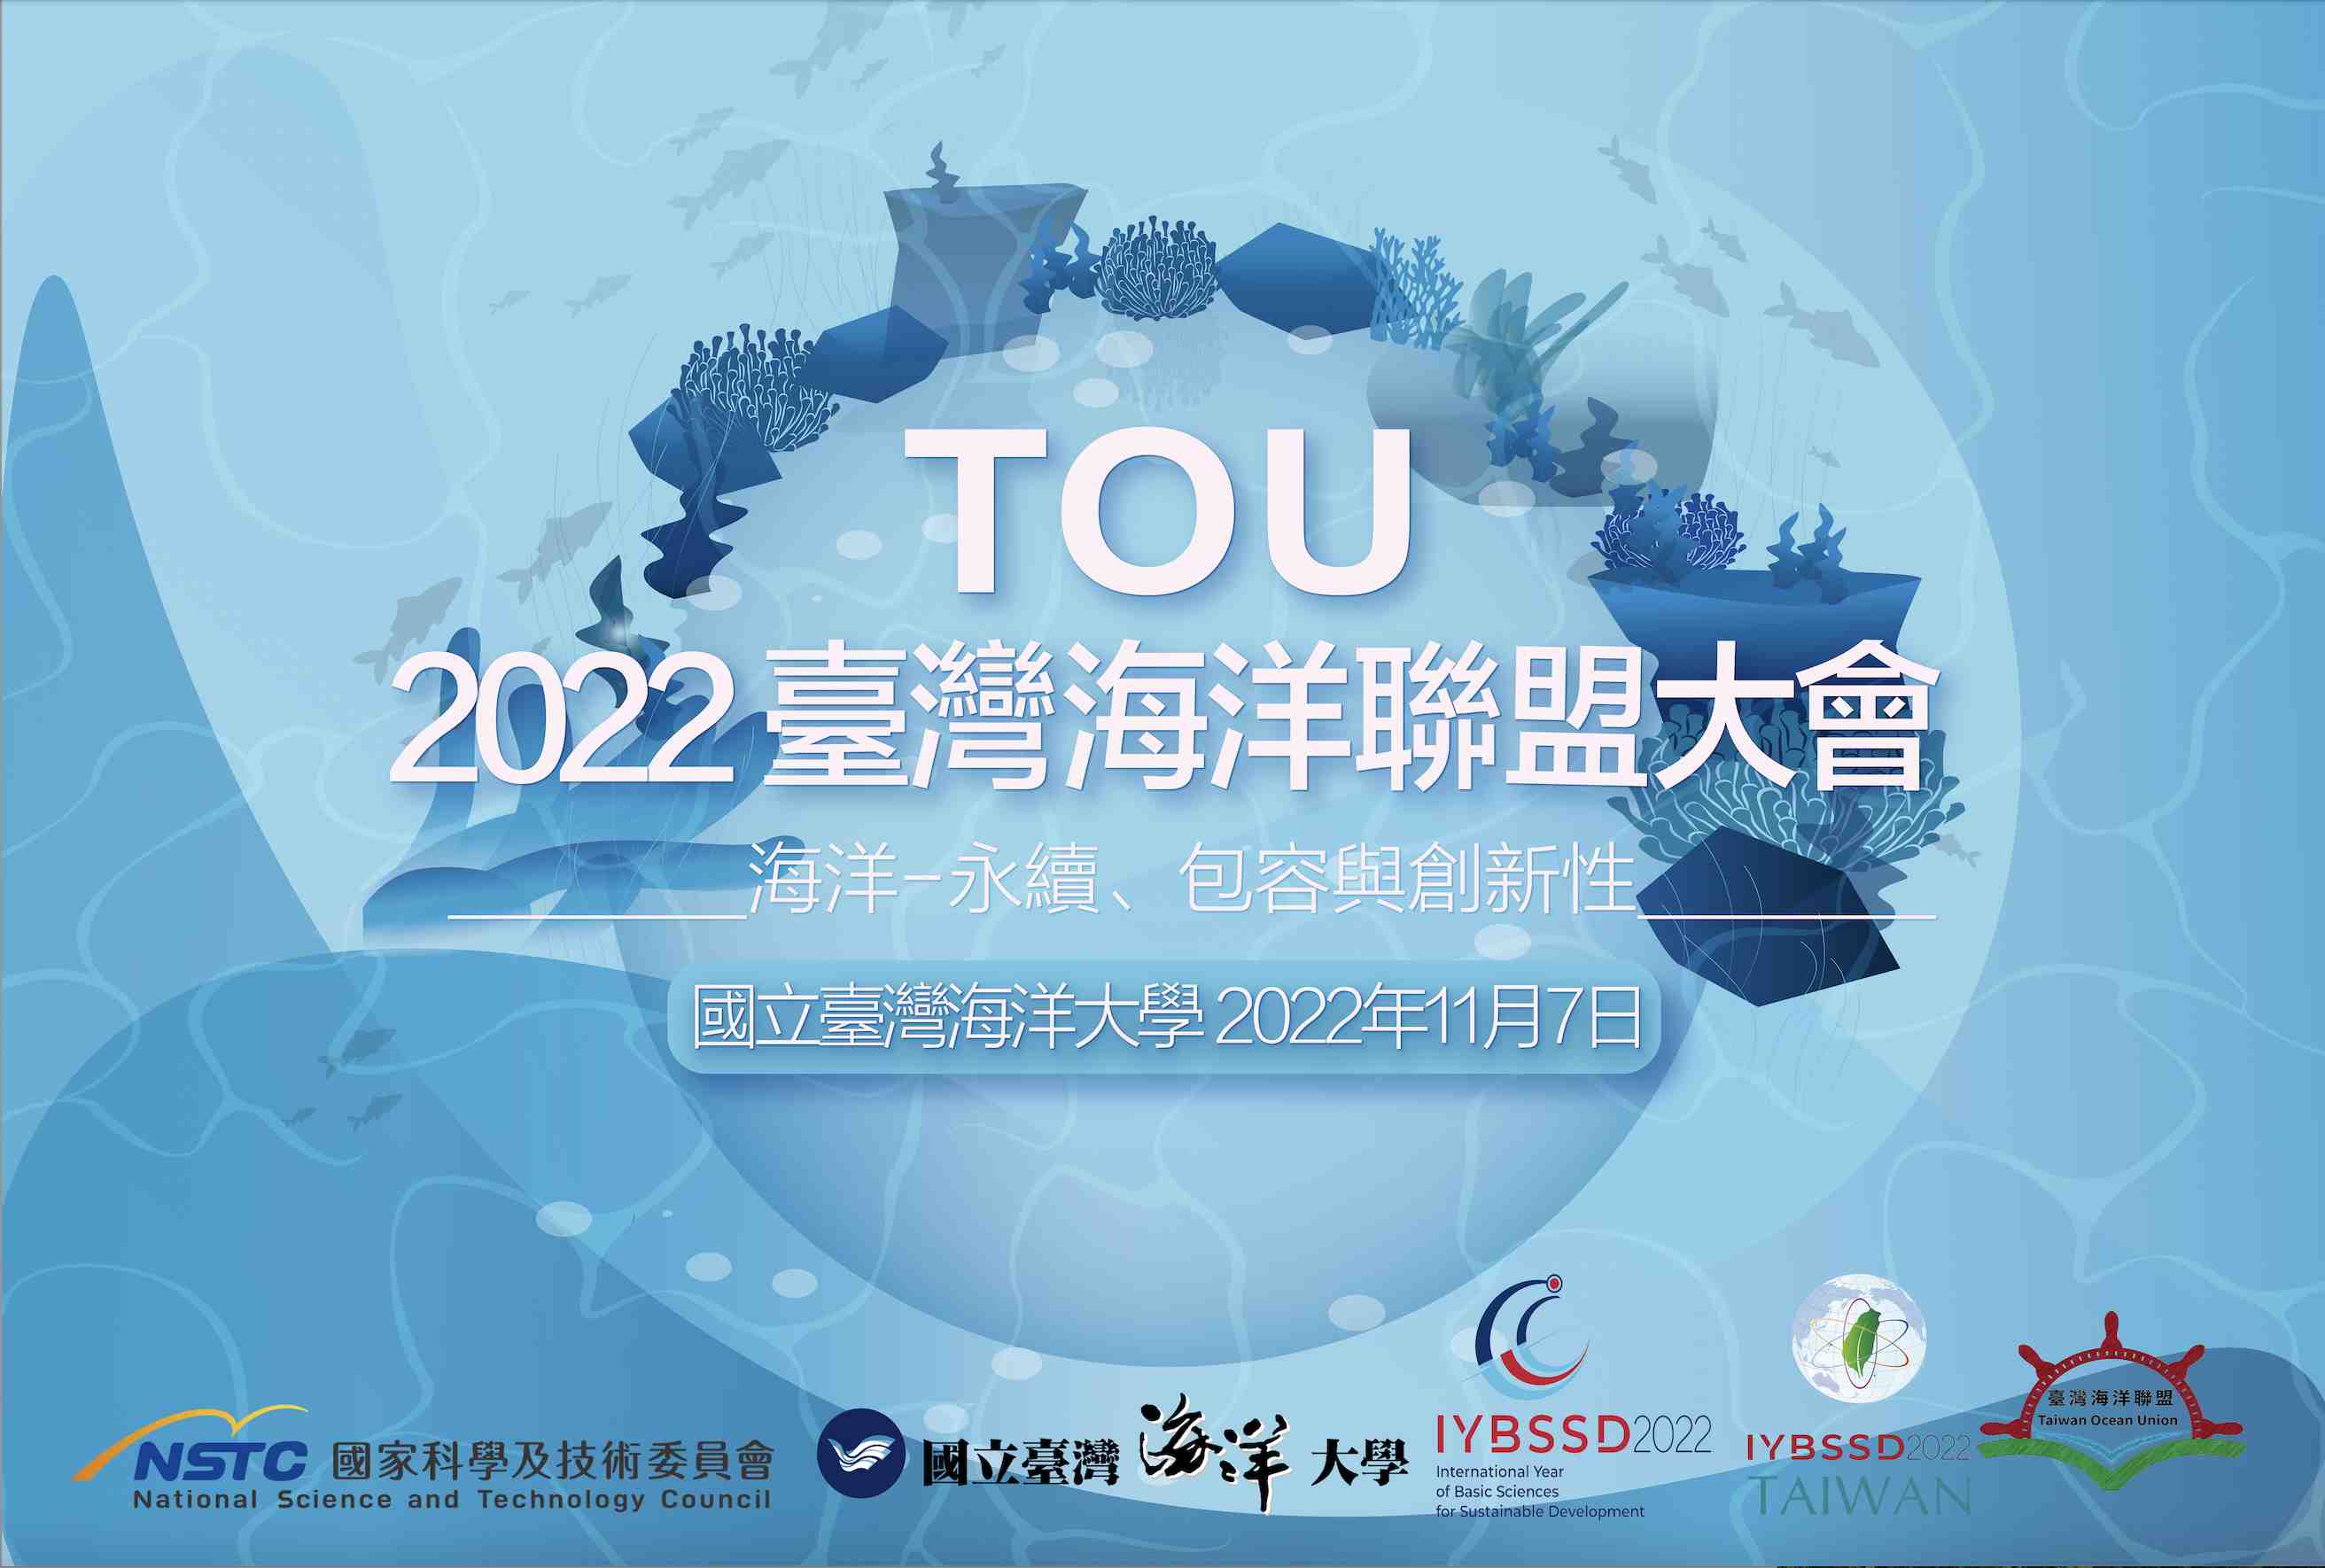 Conference of the Taiwan Ocean Union Promotional Graphics or Posters